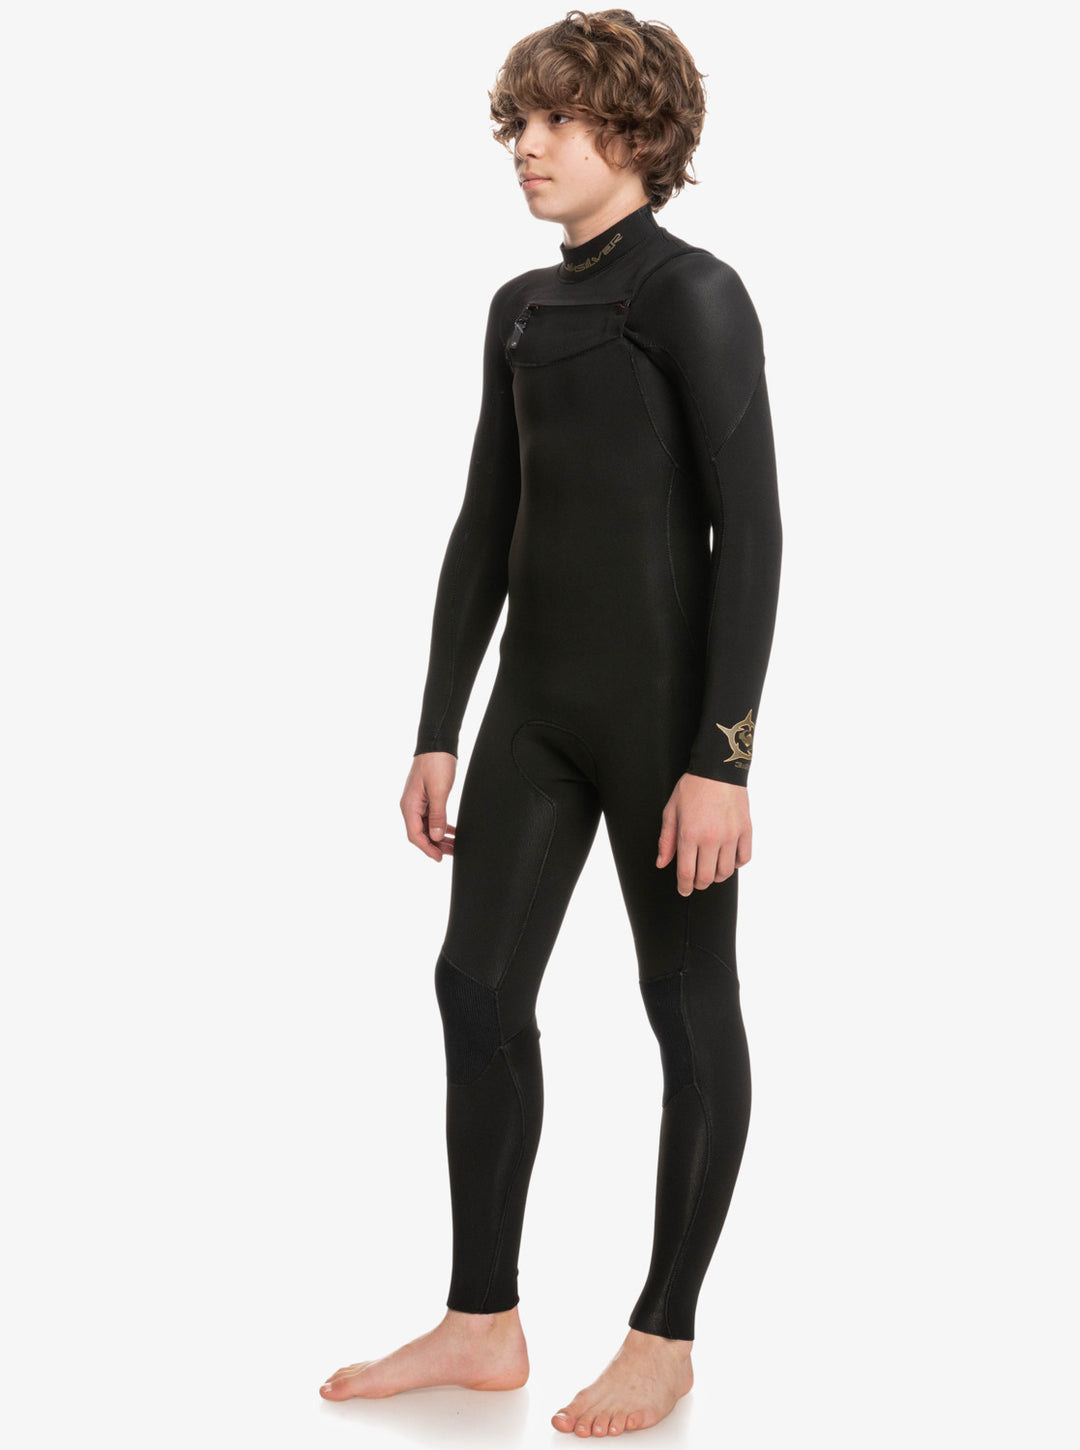 Boys Everyday Sessions 3/2 MW Steamer Kids Wetsuit - Black